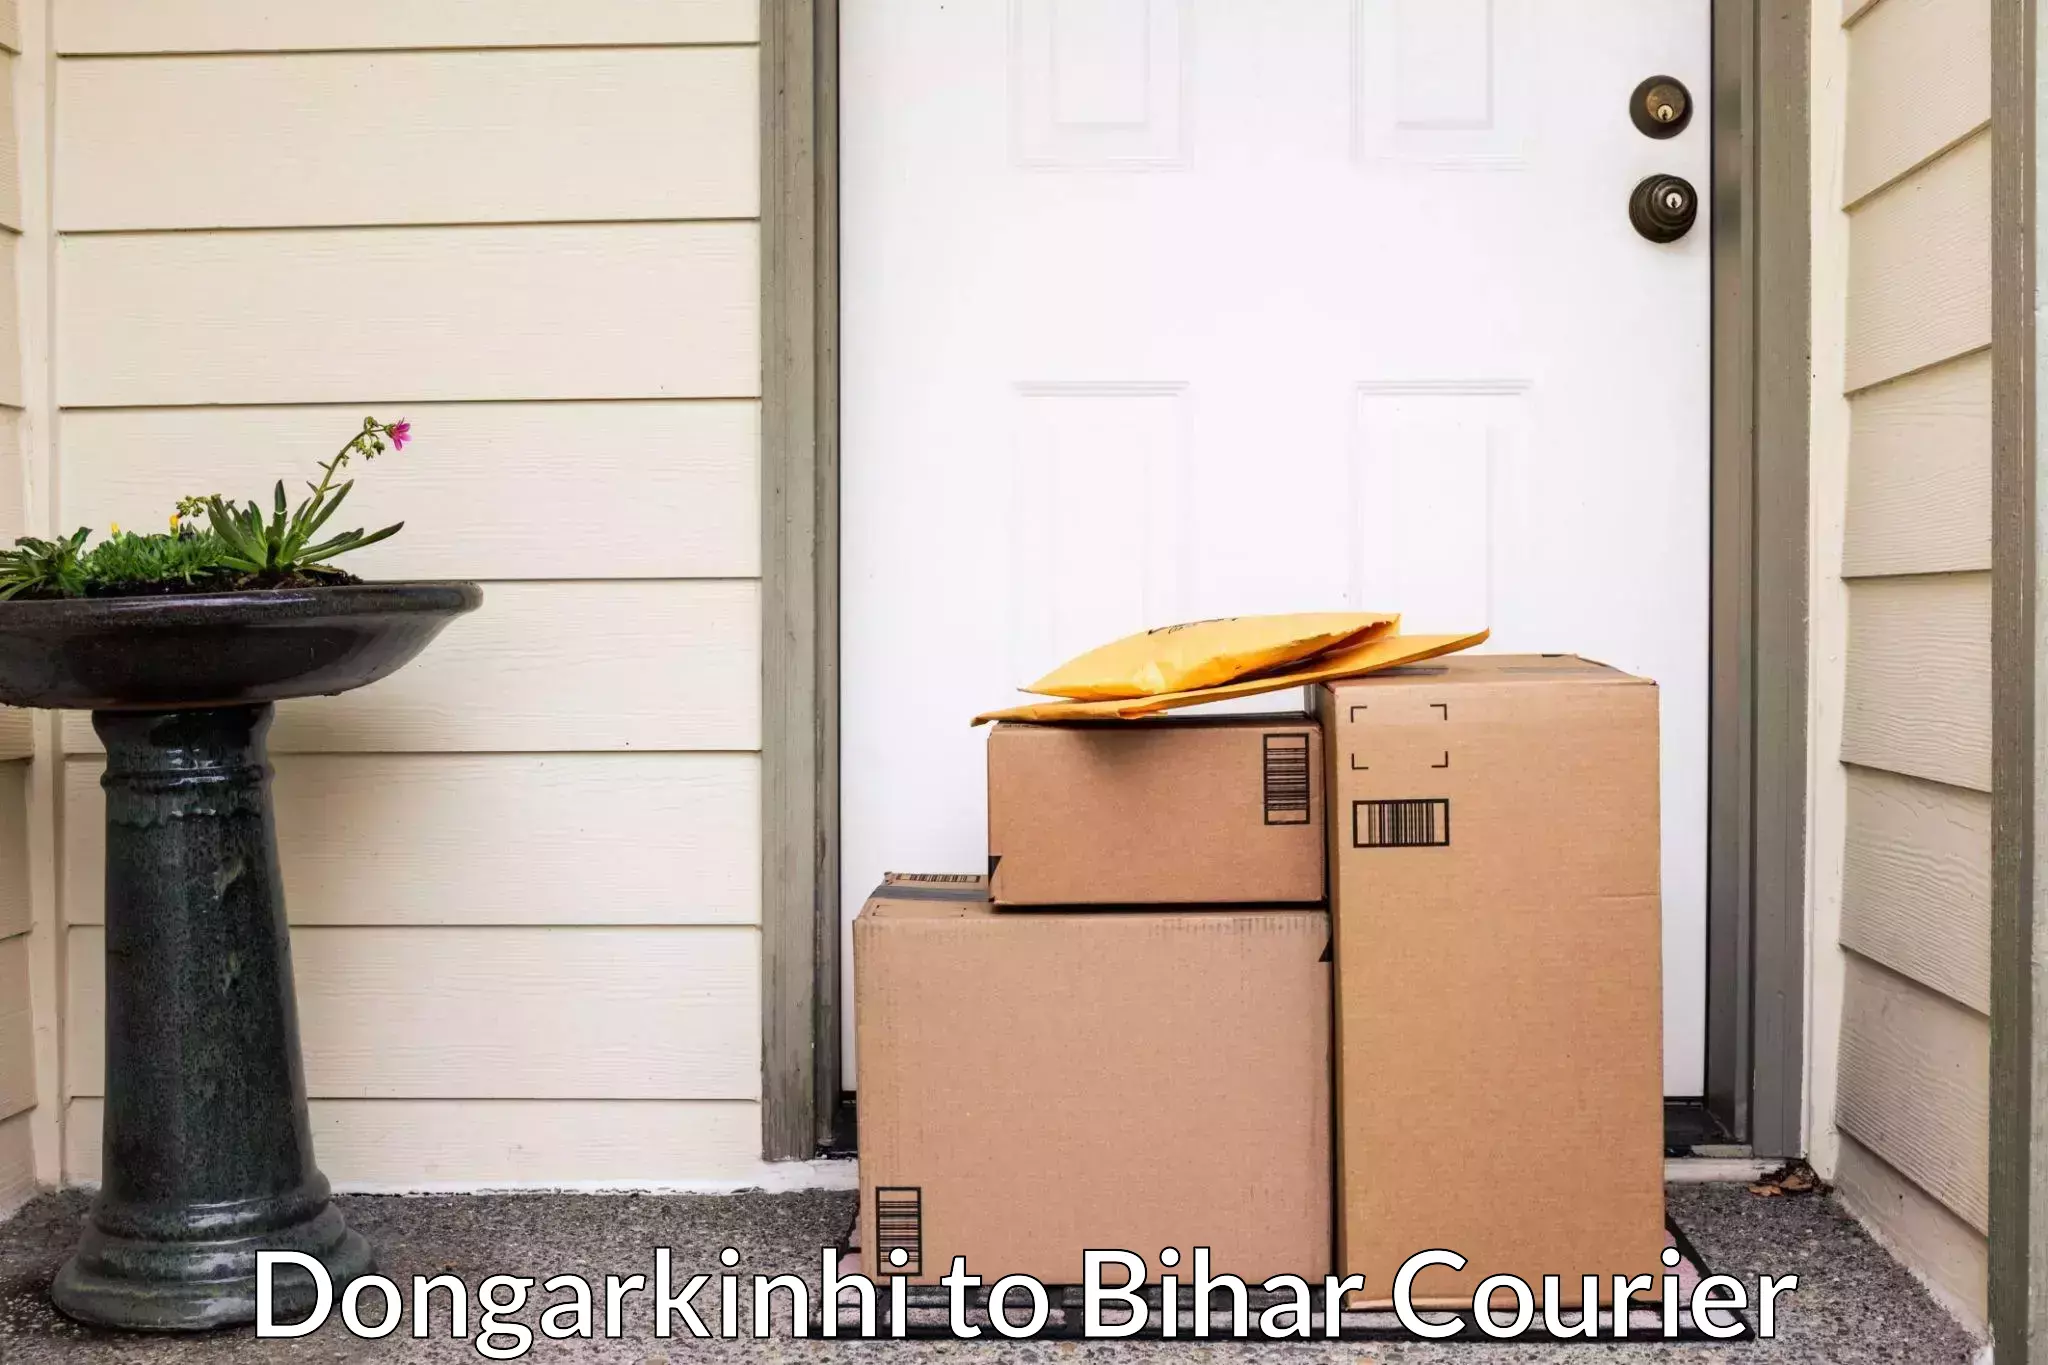 Affordable household movers Dongarkinhi to Danapur